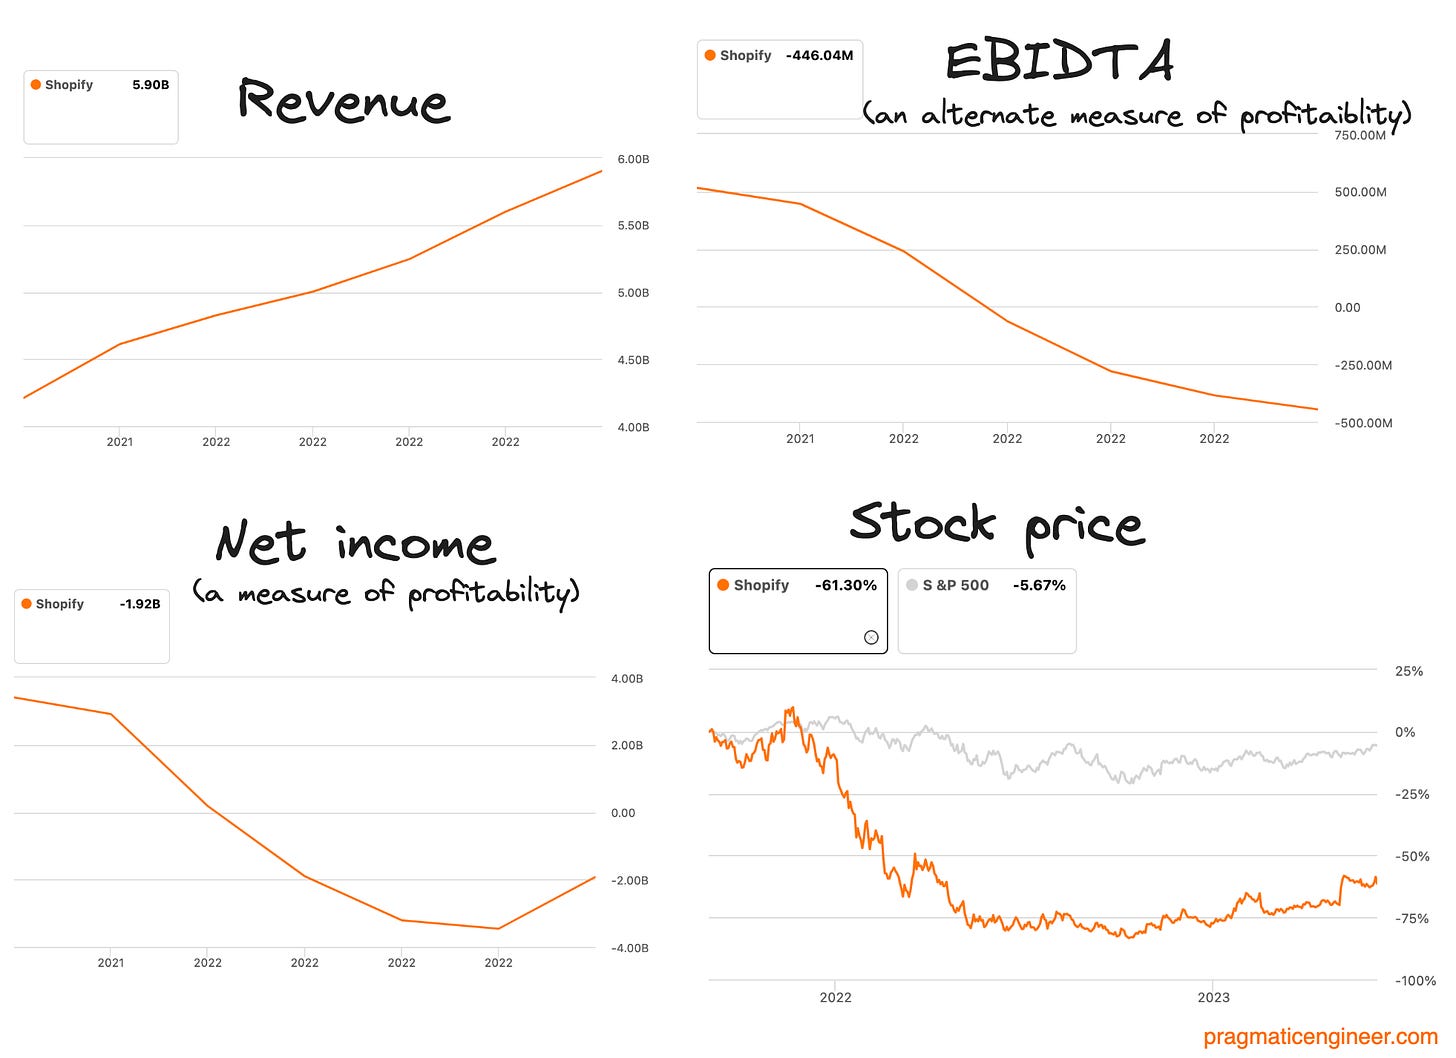 How Shopify’s revenue, net income, EBIDTA (Earnings Before Interest, Taxes, and Amortization), and stock price changed the past 2 years 